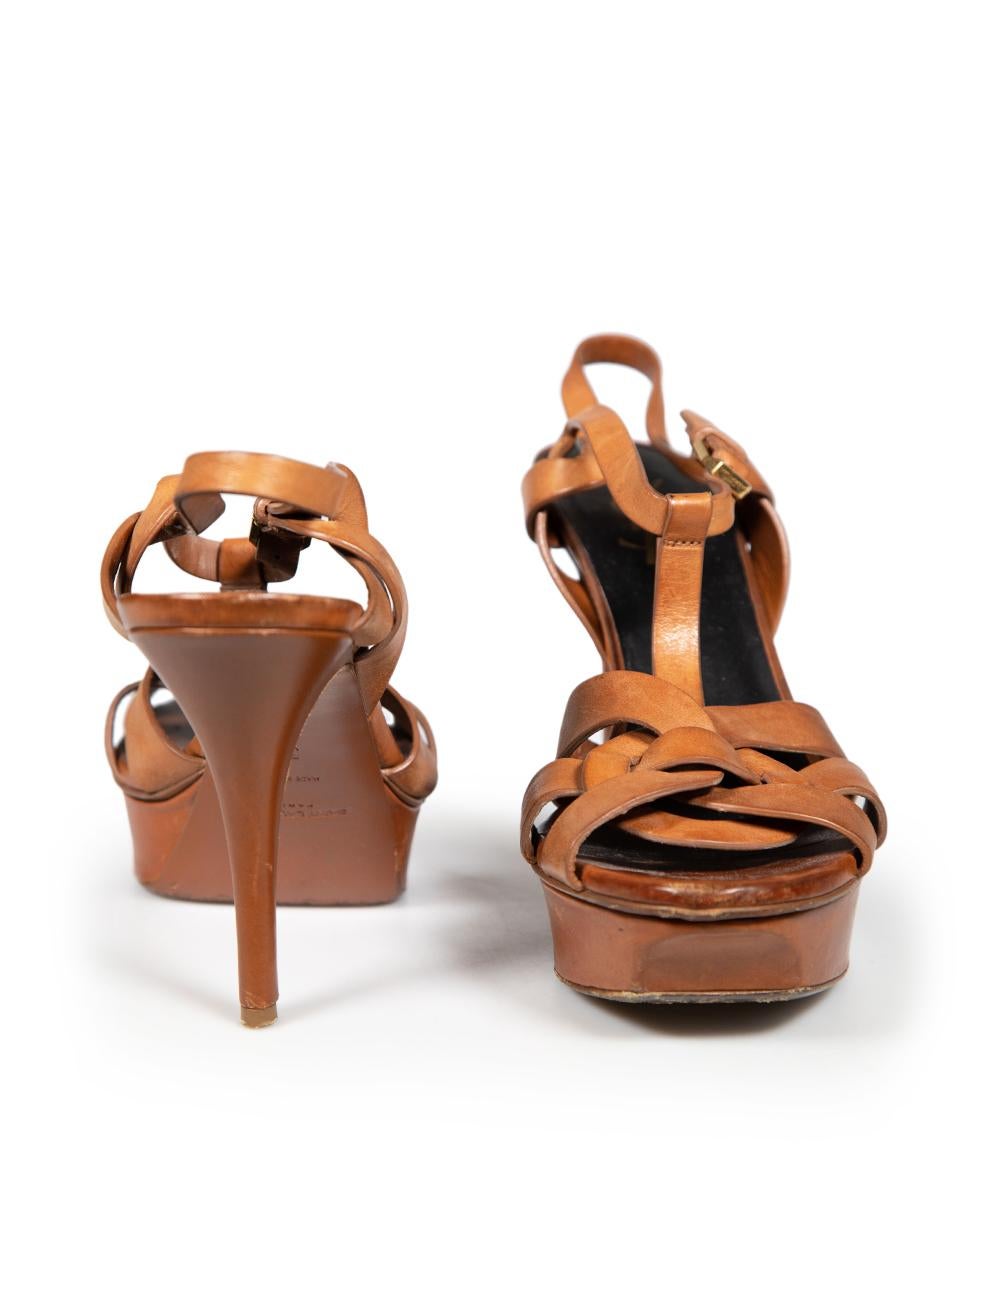 Saint Laurent Brown Leather Tribute Sandals Size IT 39 In Good Condition For Sale In London, GB